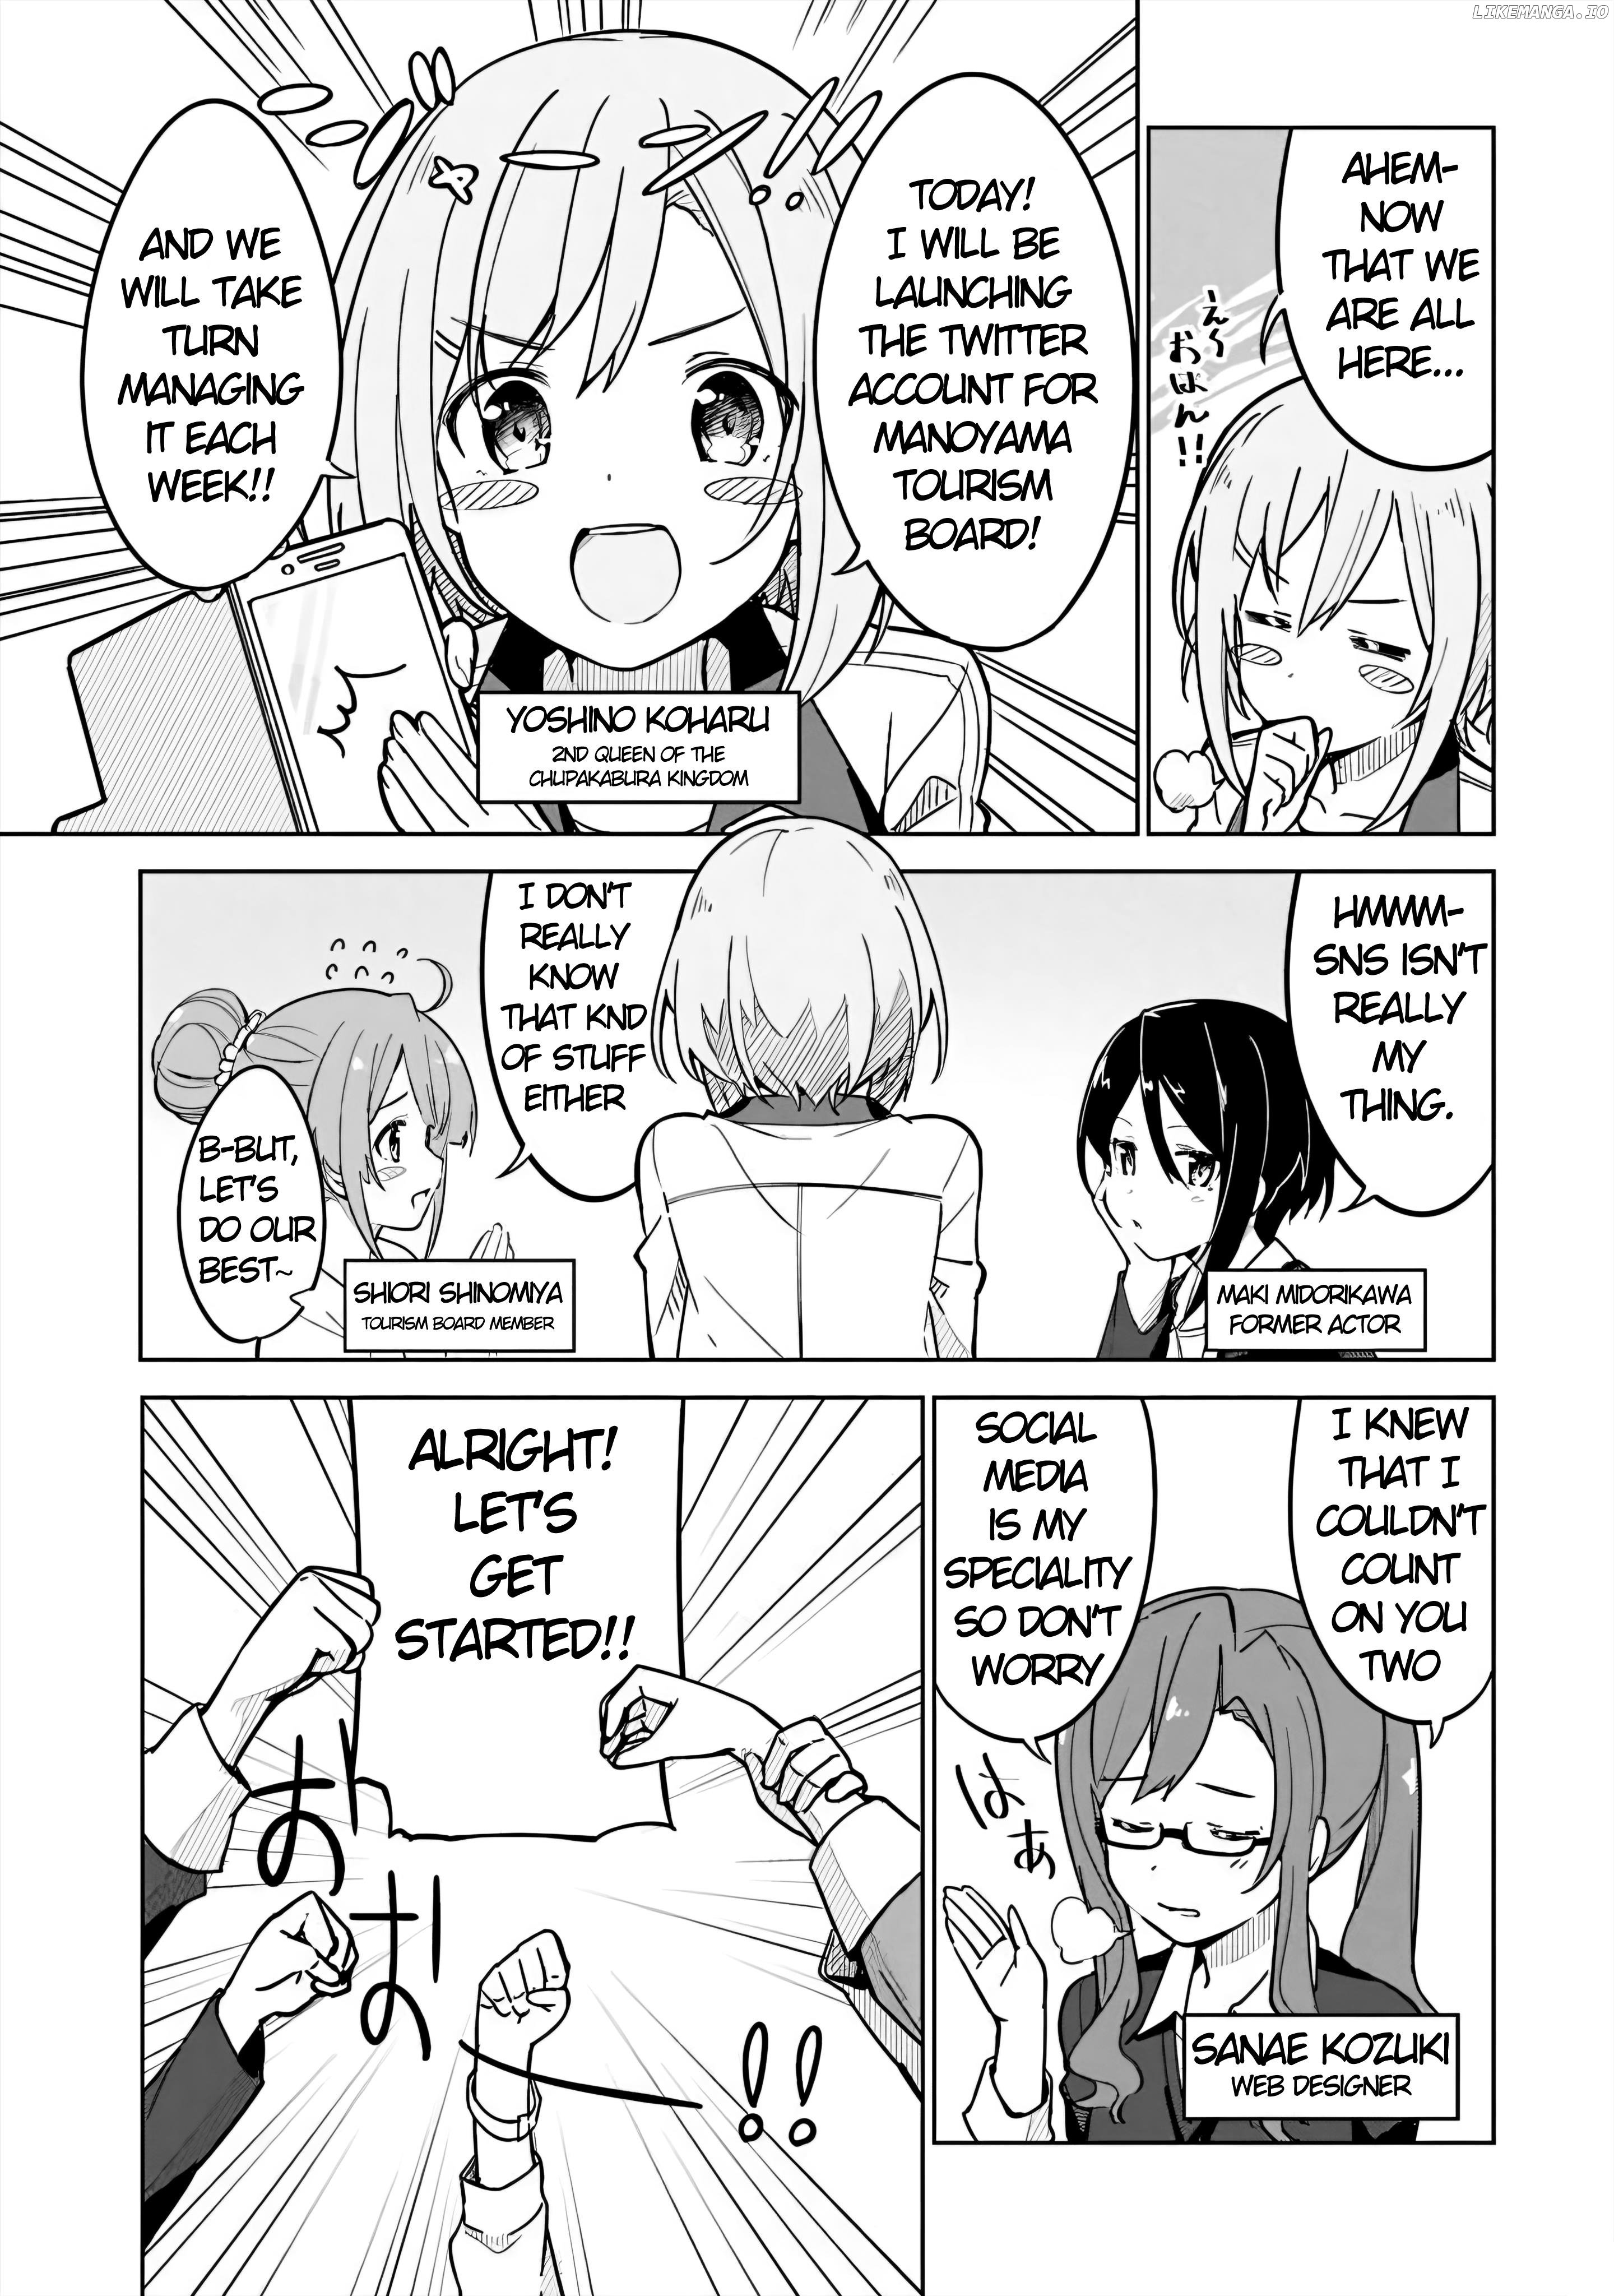 Sakura Quest Side Story: Ririko Oribe's Daily Report Vol 1 chapter 1 - page 8